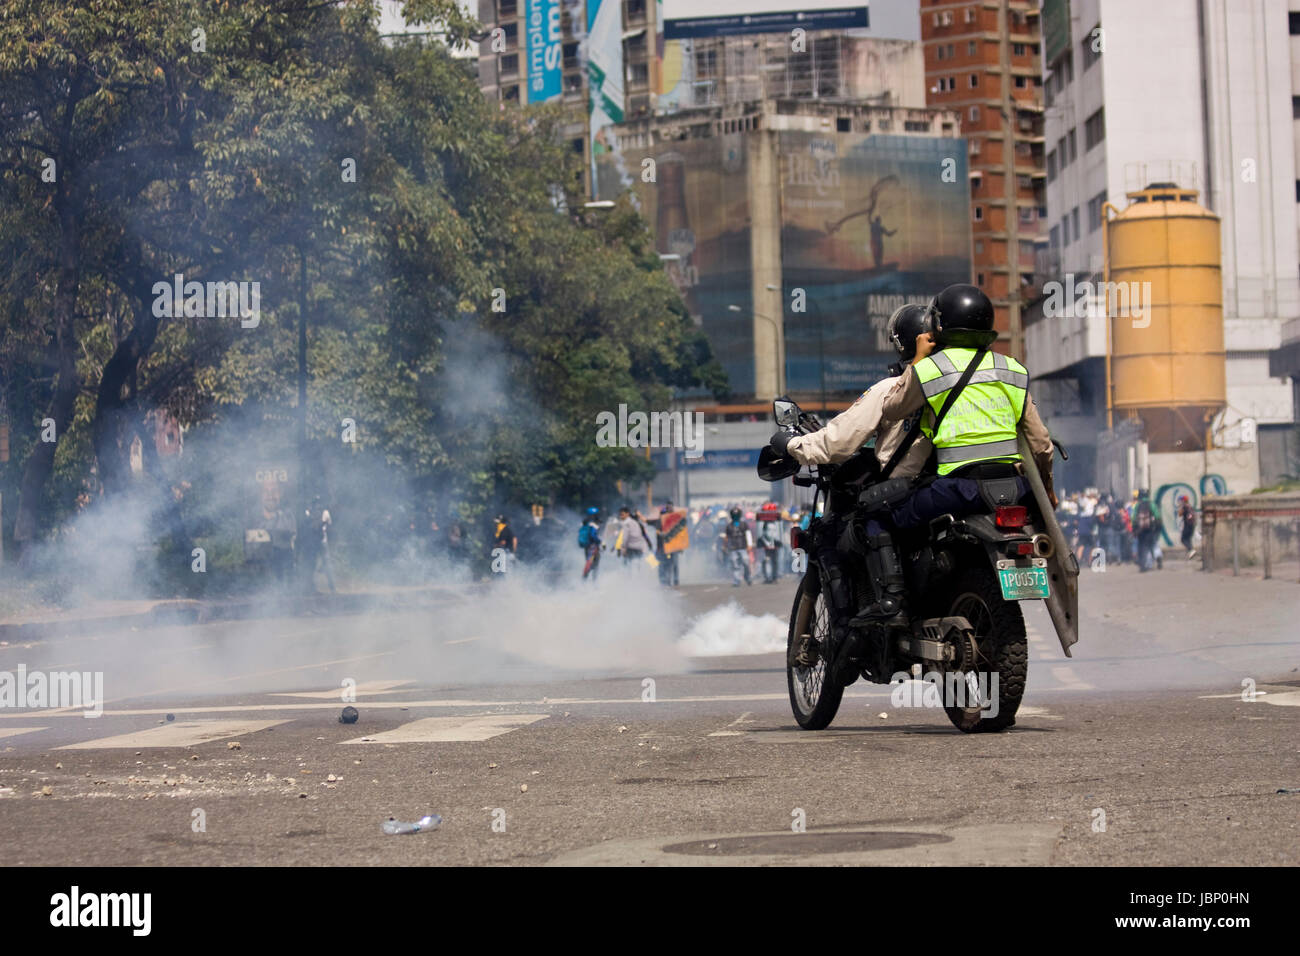 Police officers clash with demonstrators during a protest against the government of Nicolas Maduro in Caracas. Stock Photo